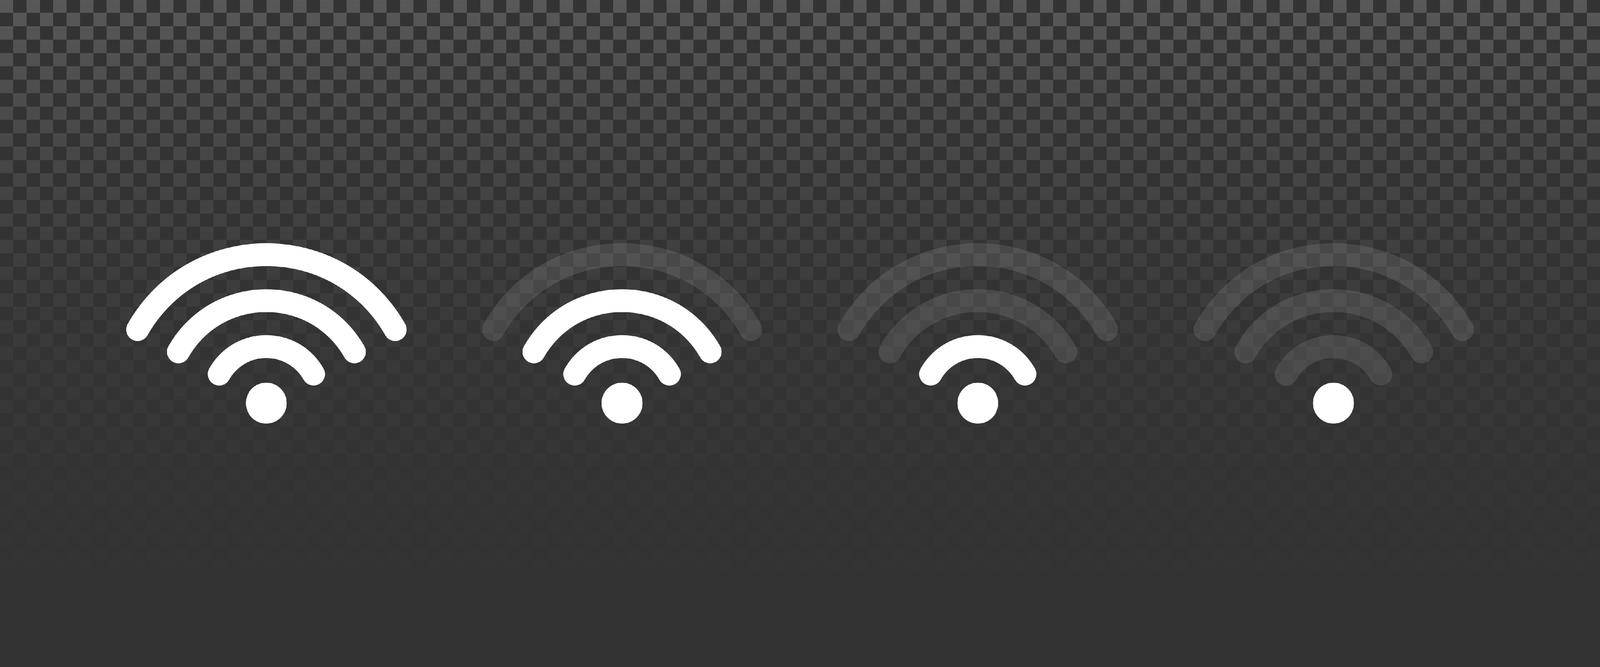 Wi-Fi icons levels. Signal strength indicator symbols isolated on dark transparent background. Vector EPS 10 by TopRated